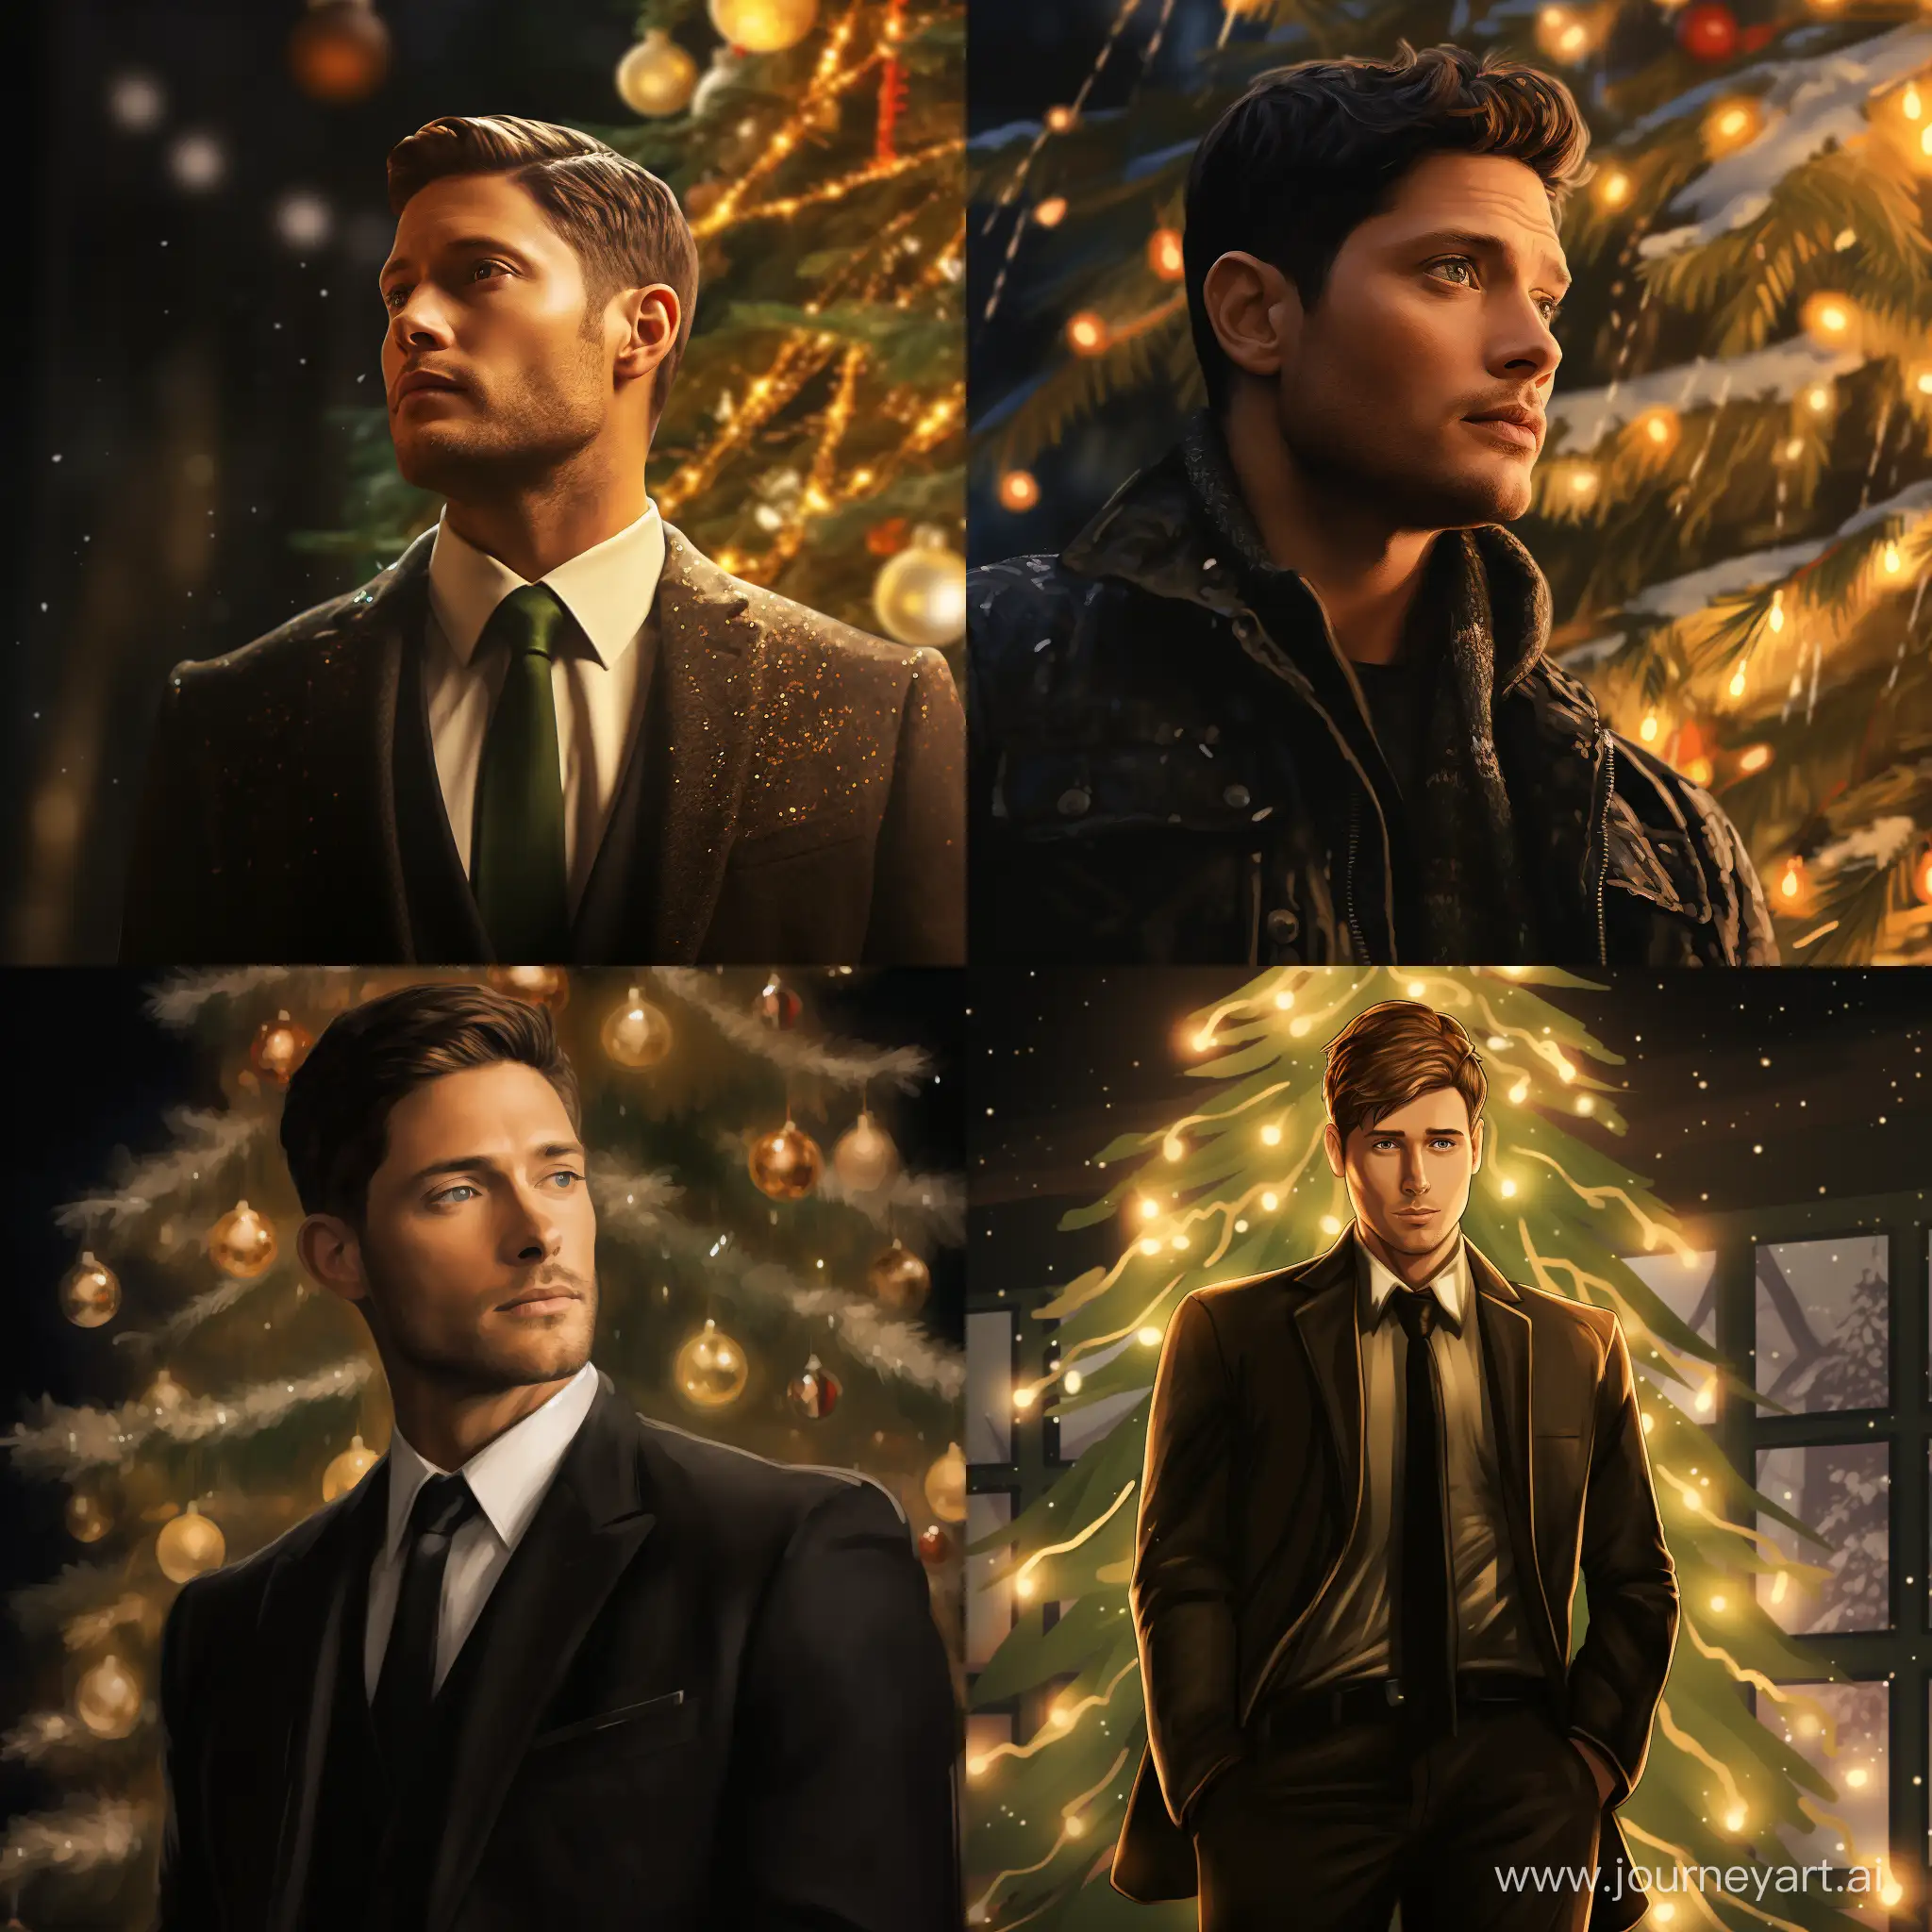 Celebrating-New-Years-Eve-with-Dean-Winchester-and-Jensen-Ackles-by-the-Christmas-Tree